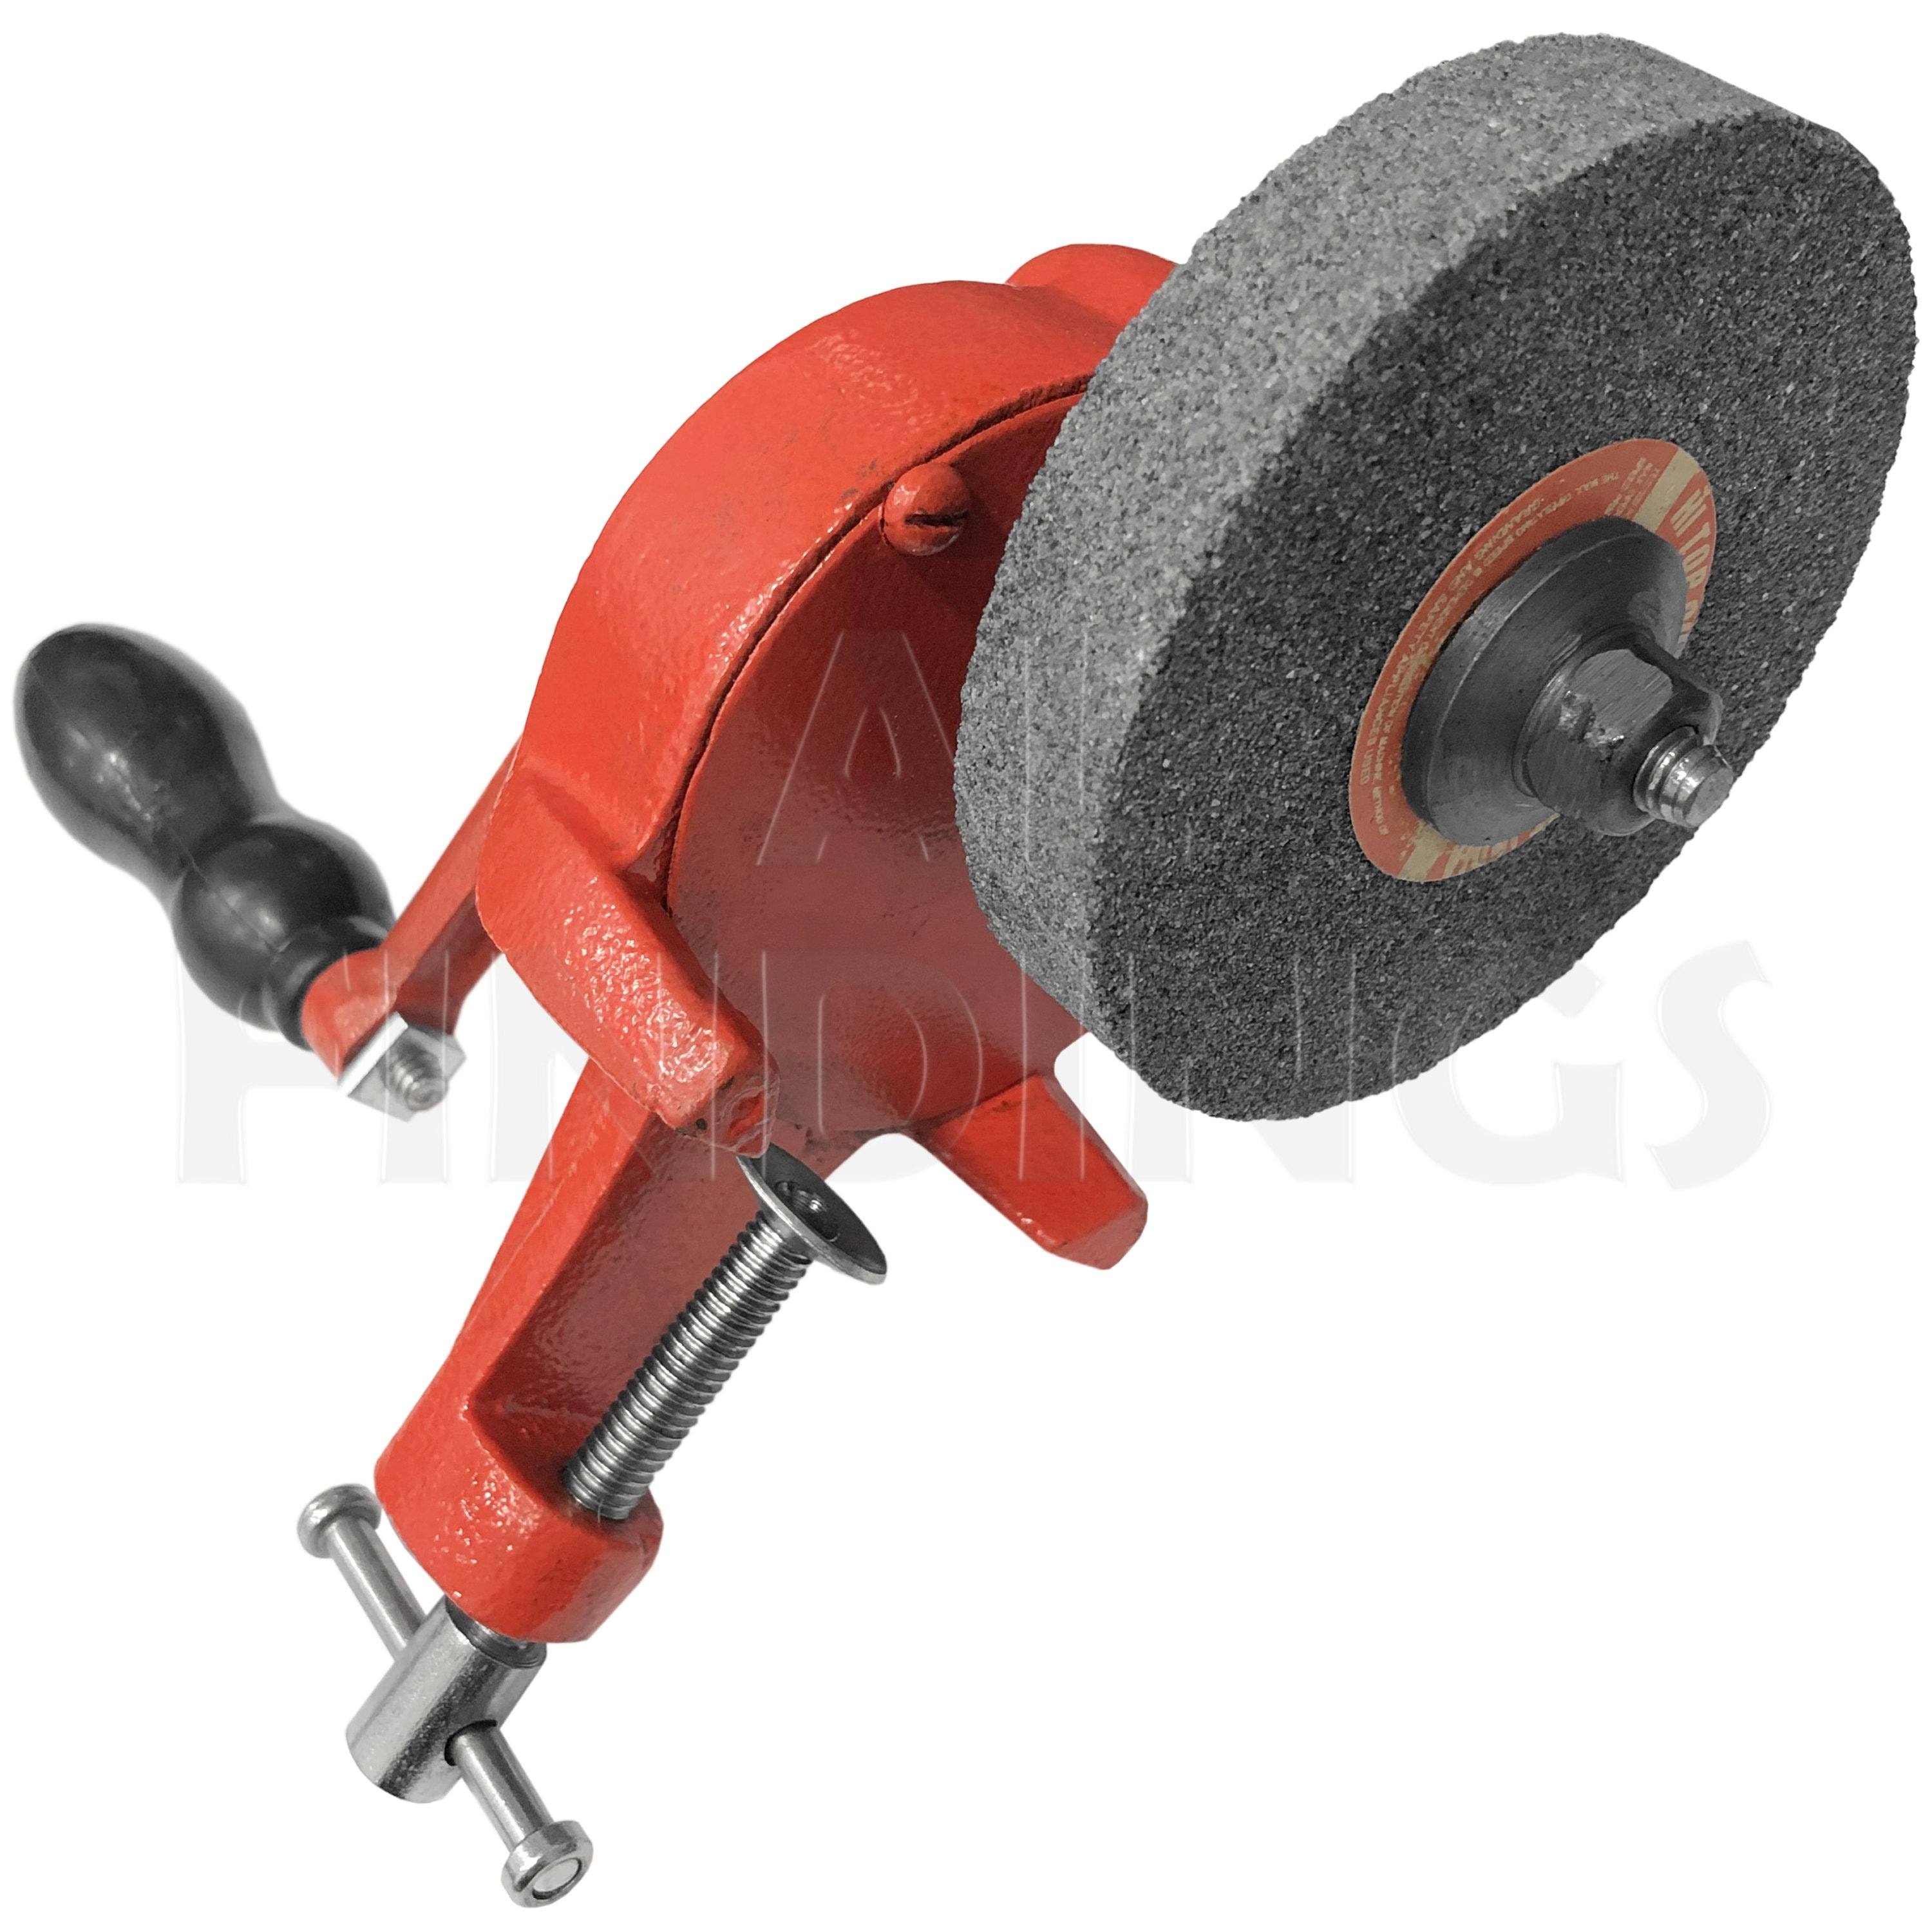 Old Hand Grinder for Nuts stock image. Image of operated - 209141567